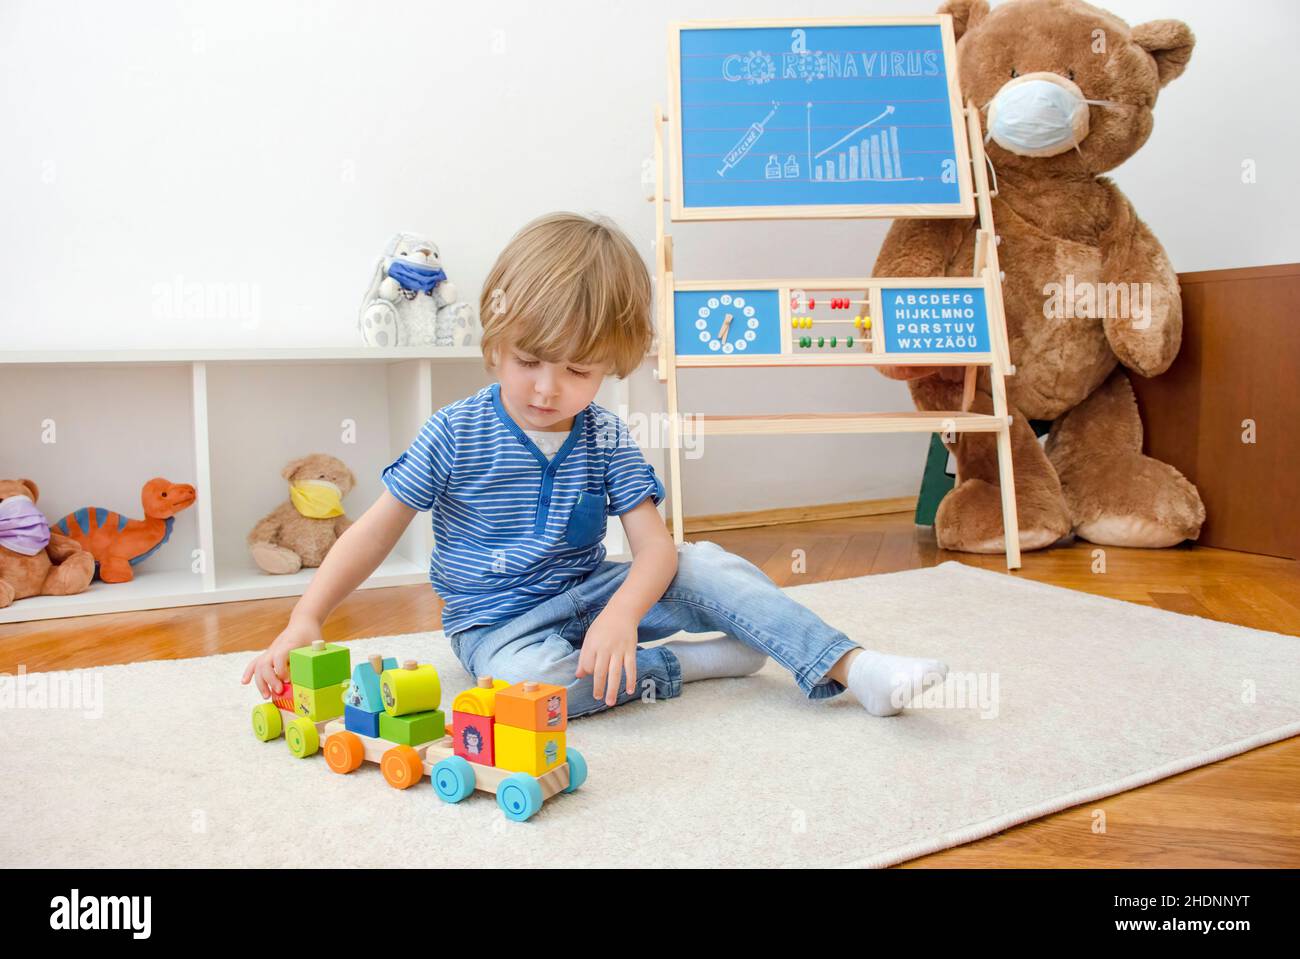 Cute child boy playing with wooden toys at home on the floor and the growing graph of COVID-2019 cases drawn on a chalkboard, during coronavirus pande Stock Photo